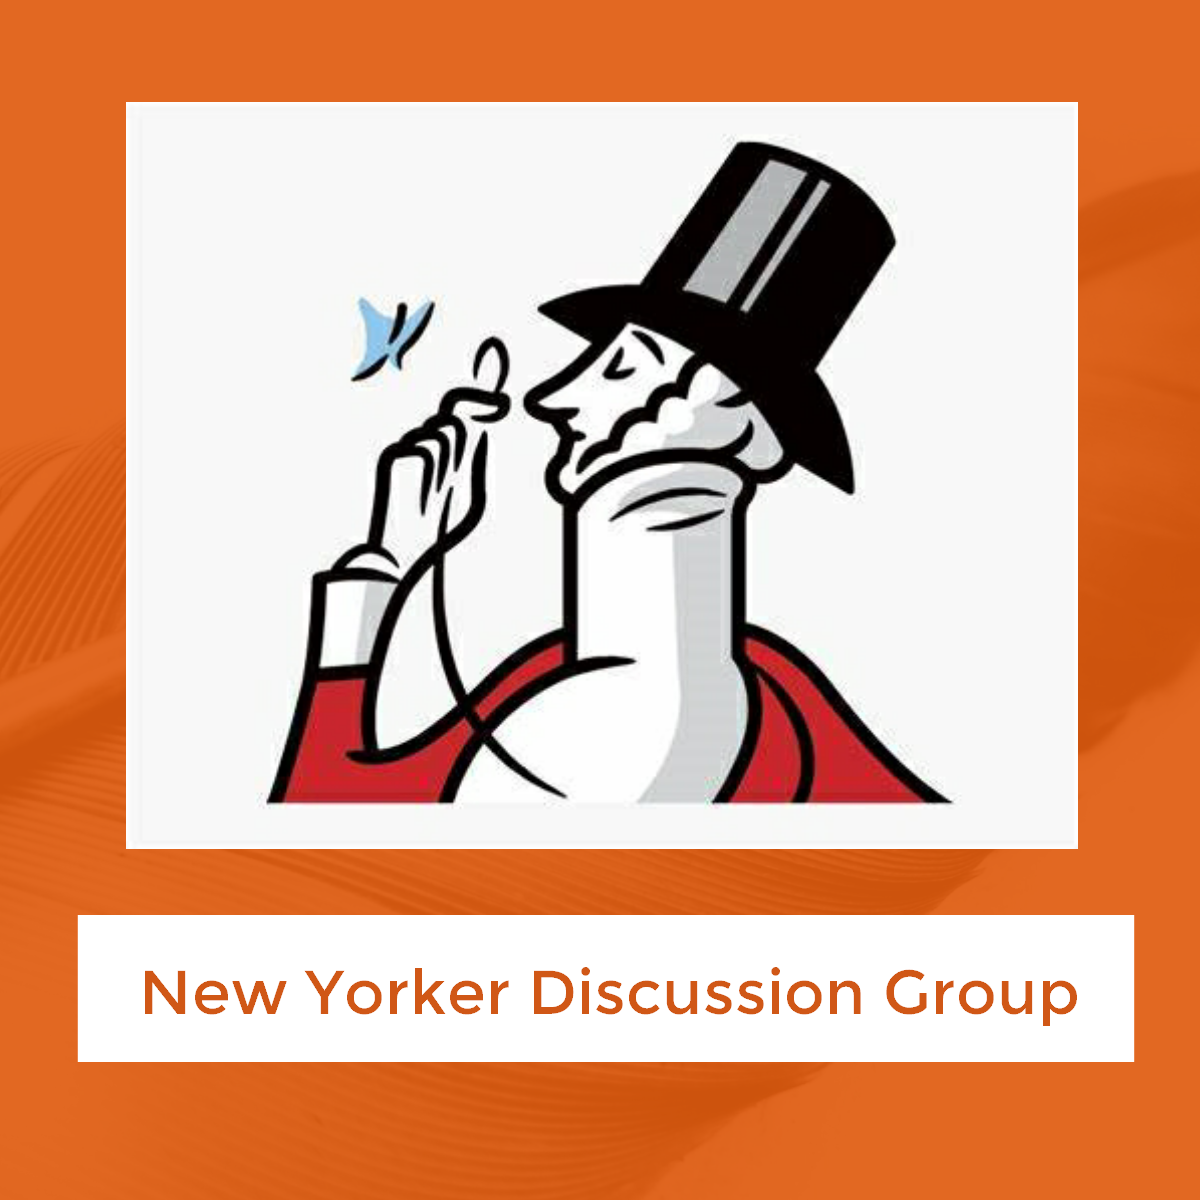 The New Yorker Discussion Group